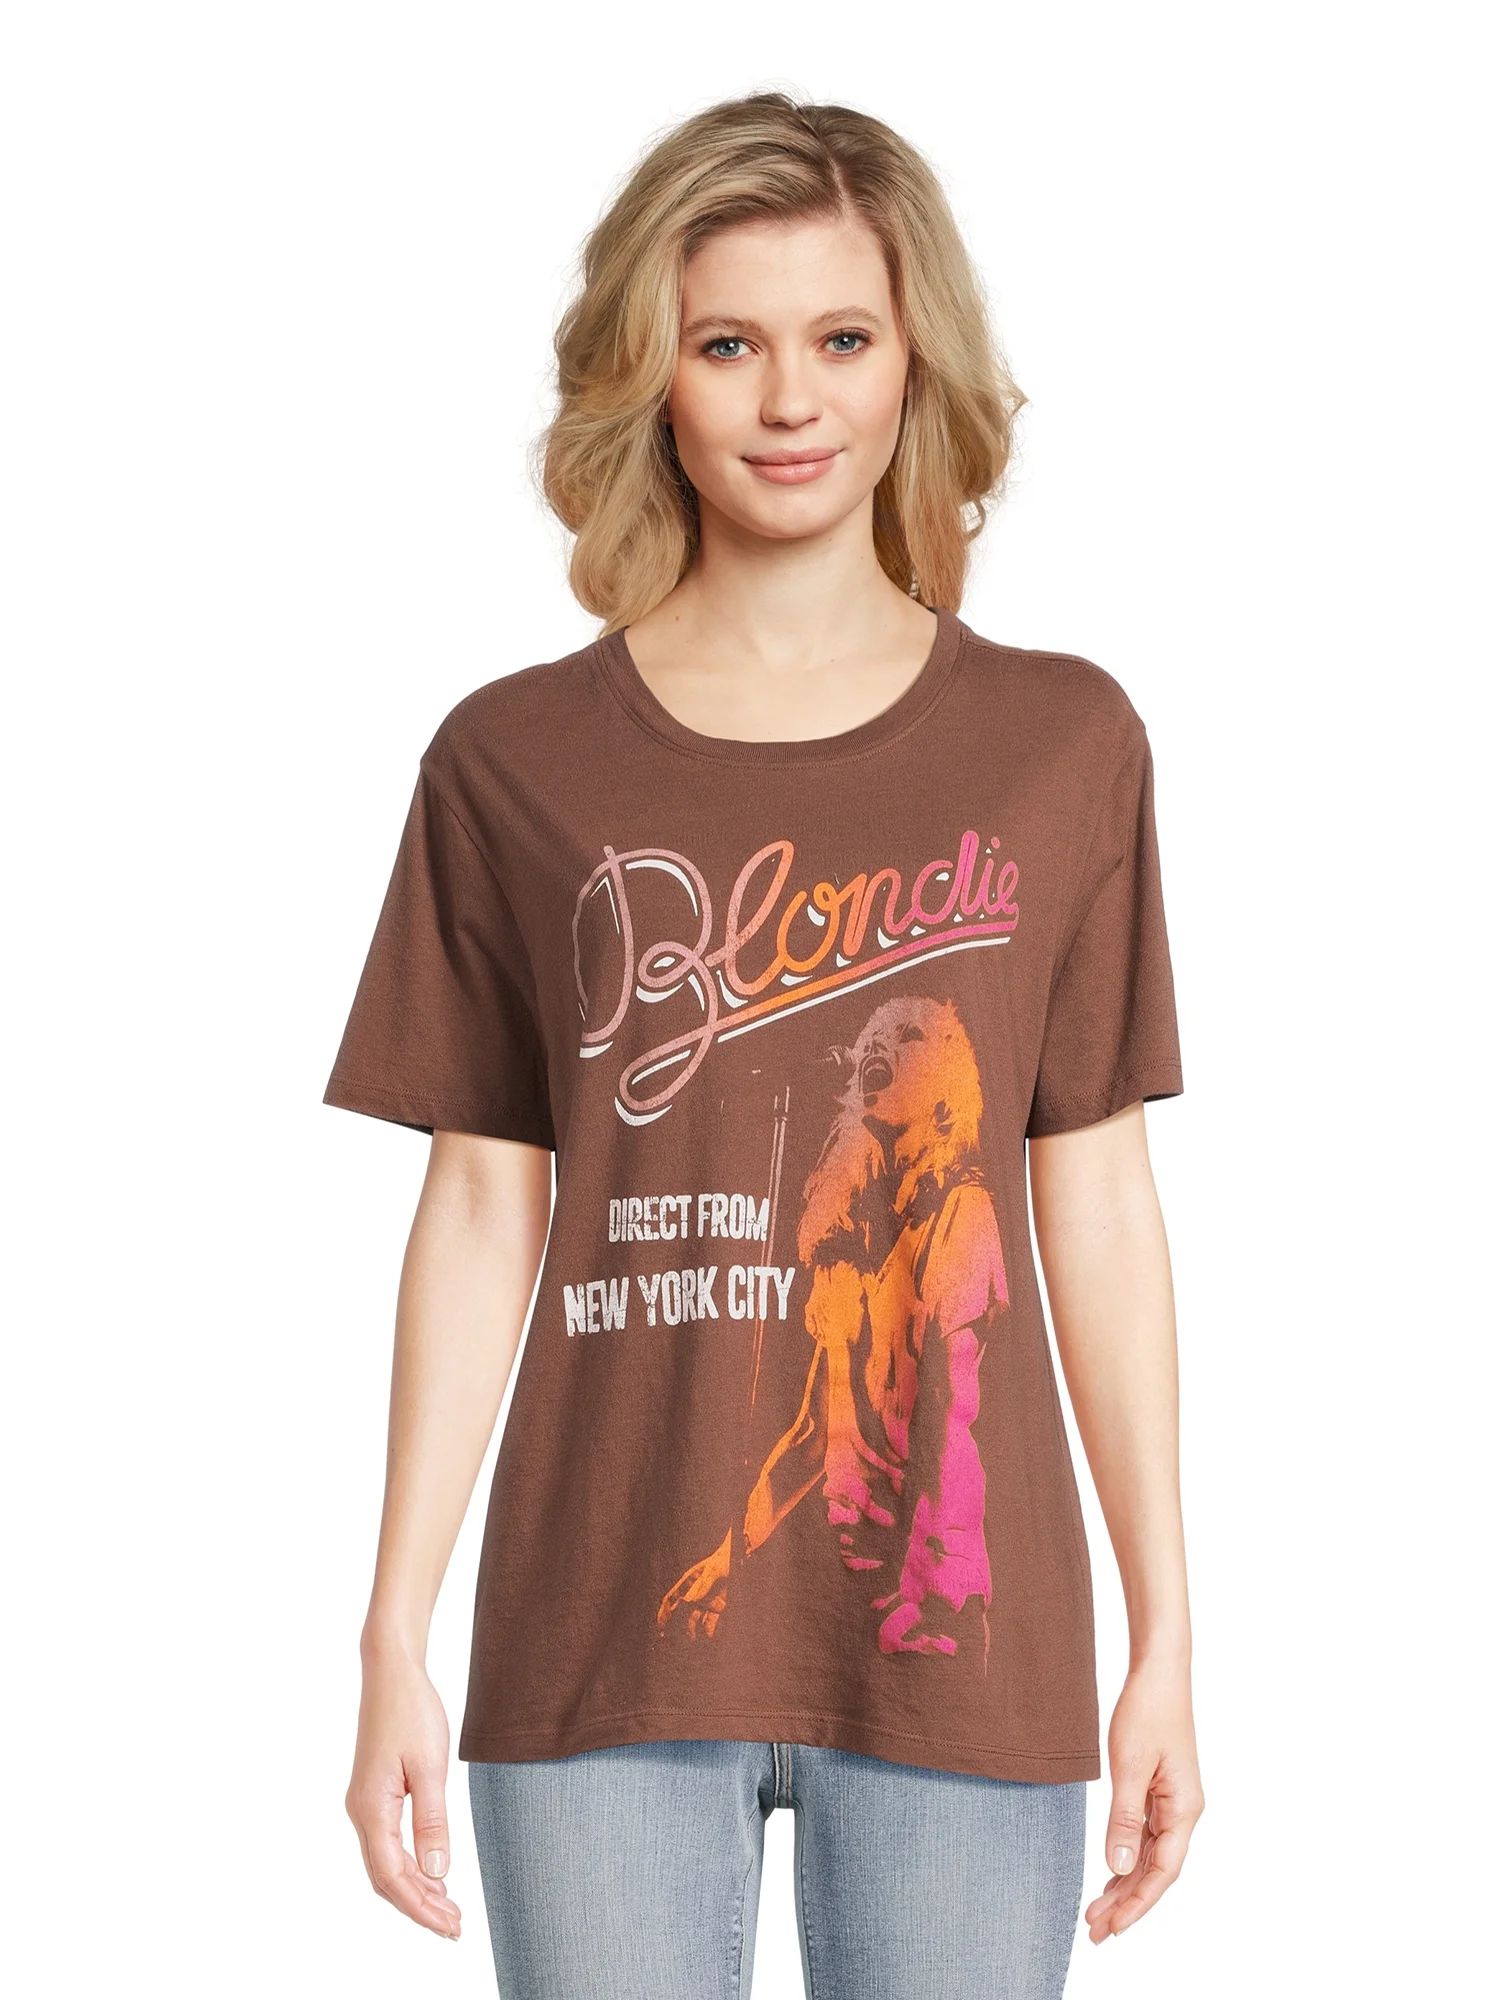 Time And Tru Women's Blondie the Band Graphic Tee with Short Sleeves, Sizes S-XXXL | Walmart (US)